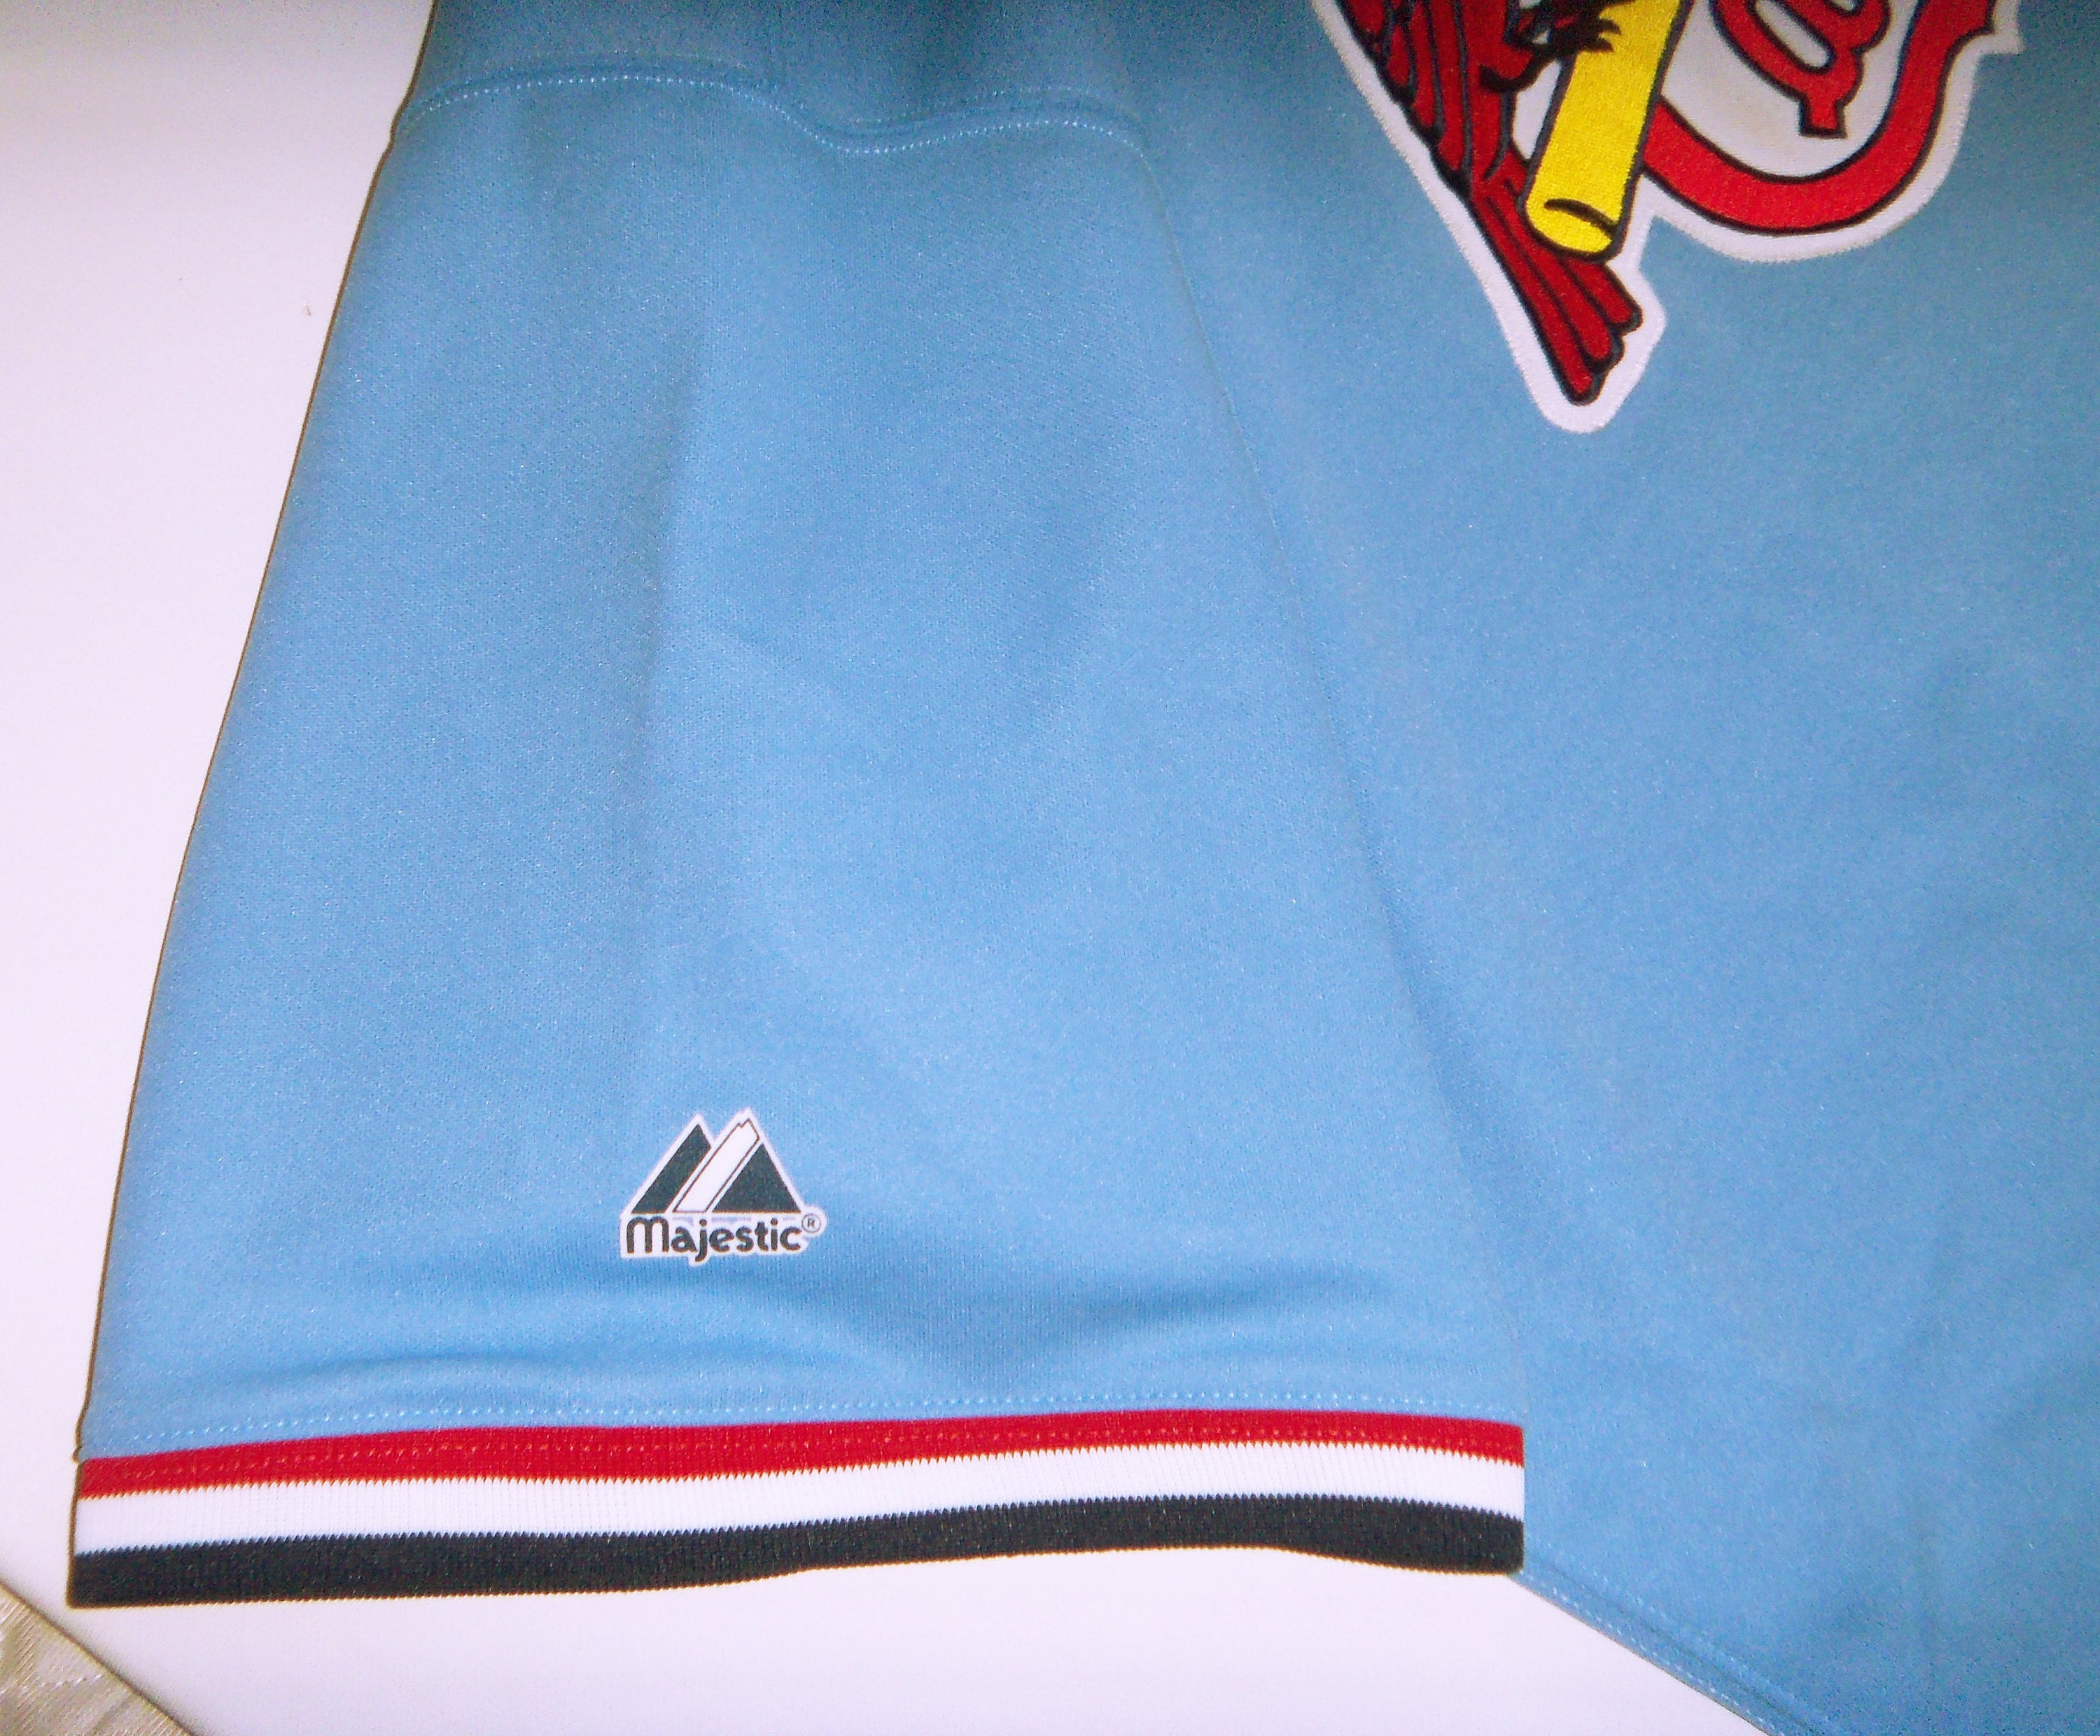 St. Louis Cardinals Jersey Blue Majestic Throwback Cooperstown 